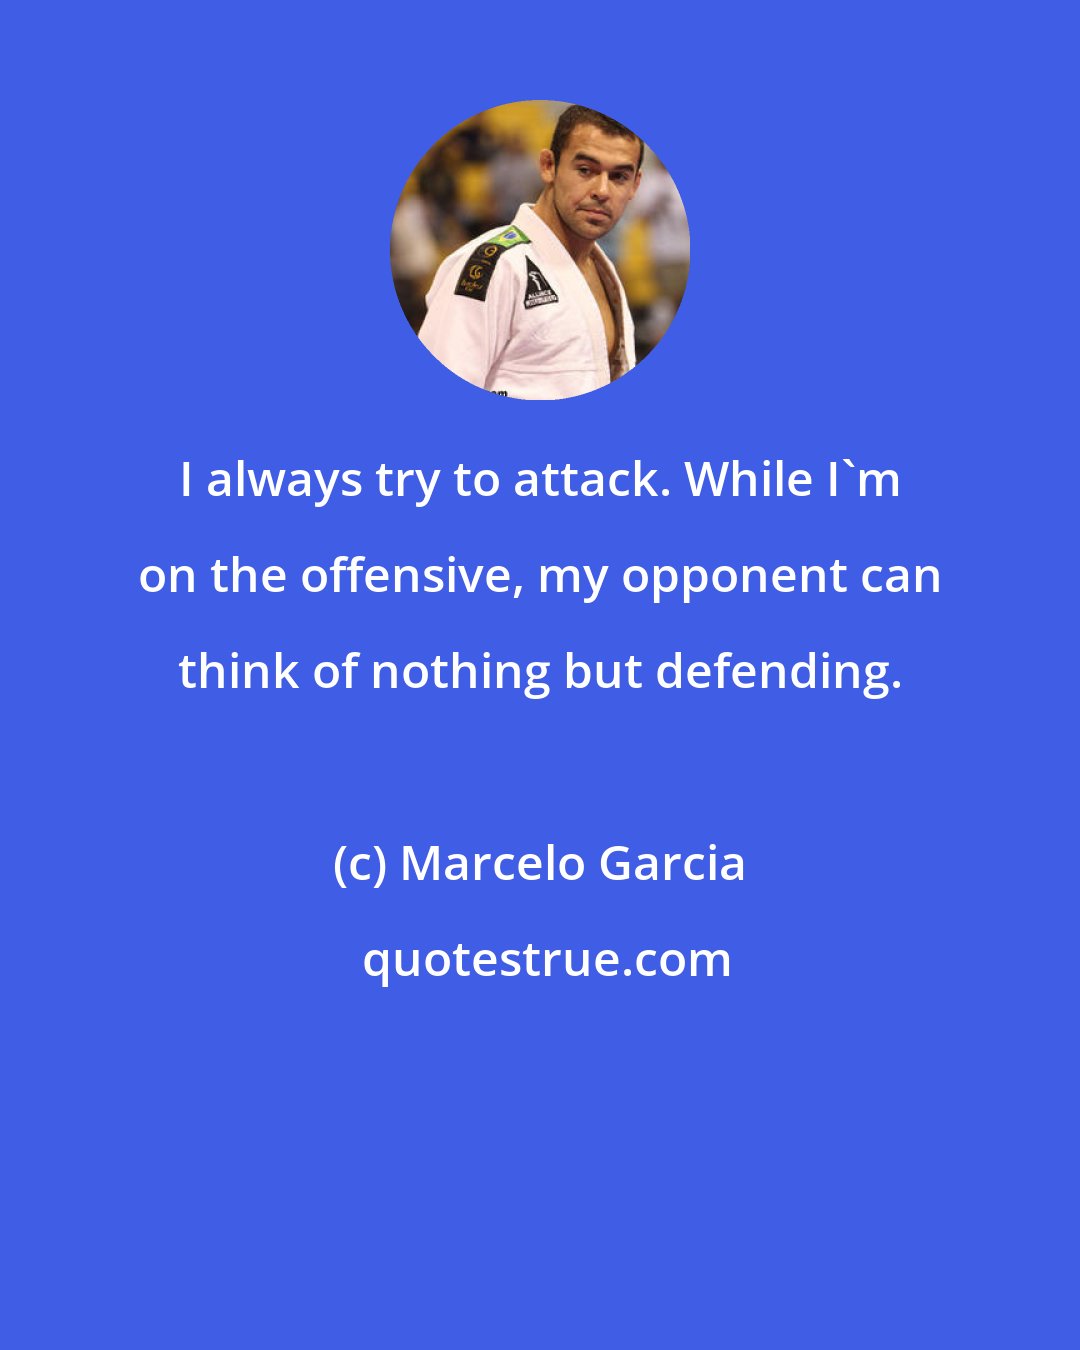 Marcelo Garcia: I always try to attack. While I'm on the offensive, my opponent can think of nothing but defending.